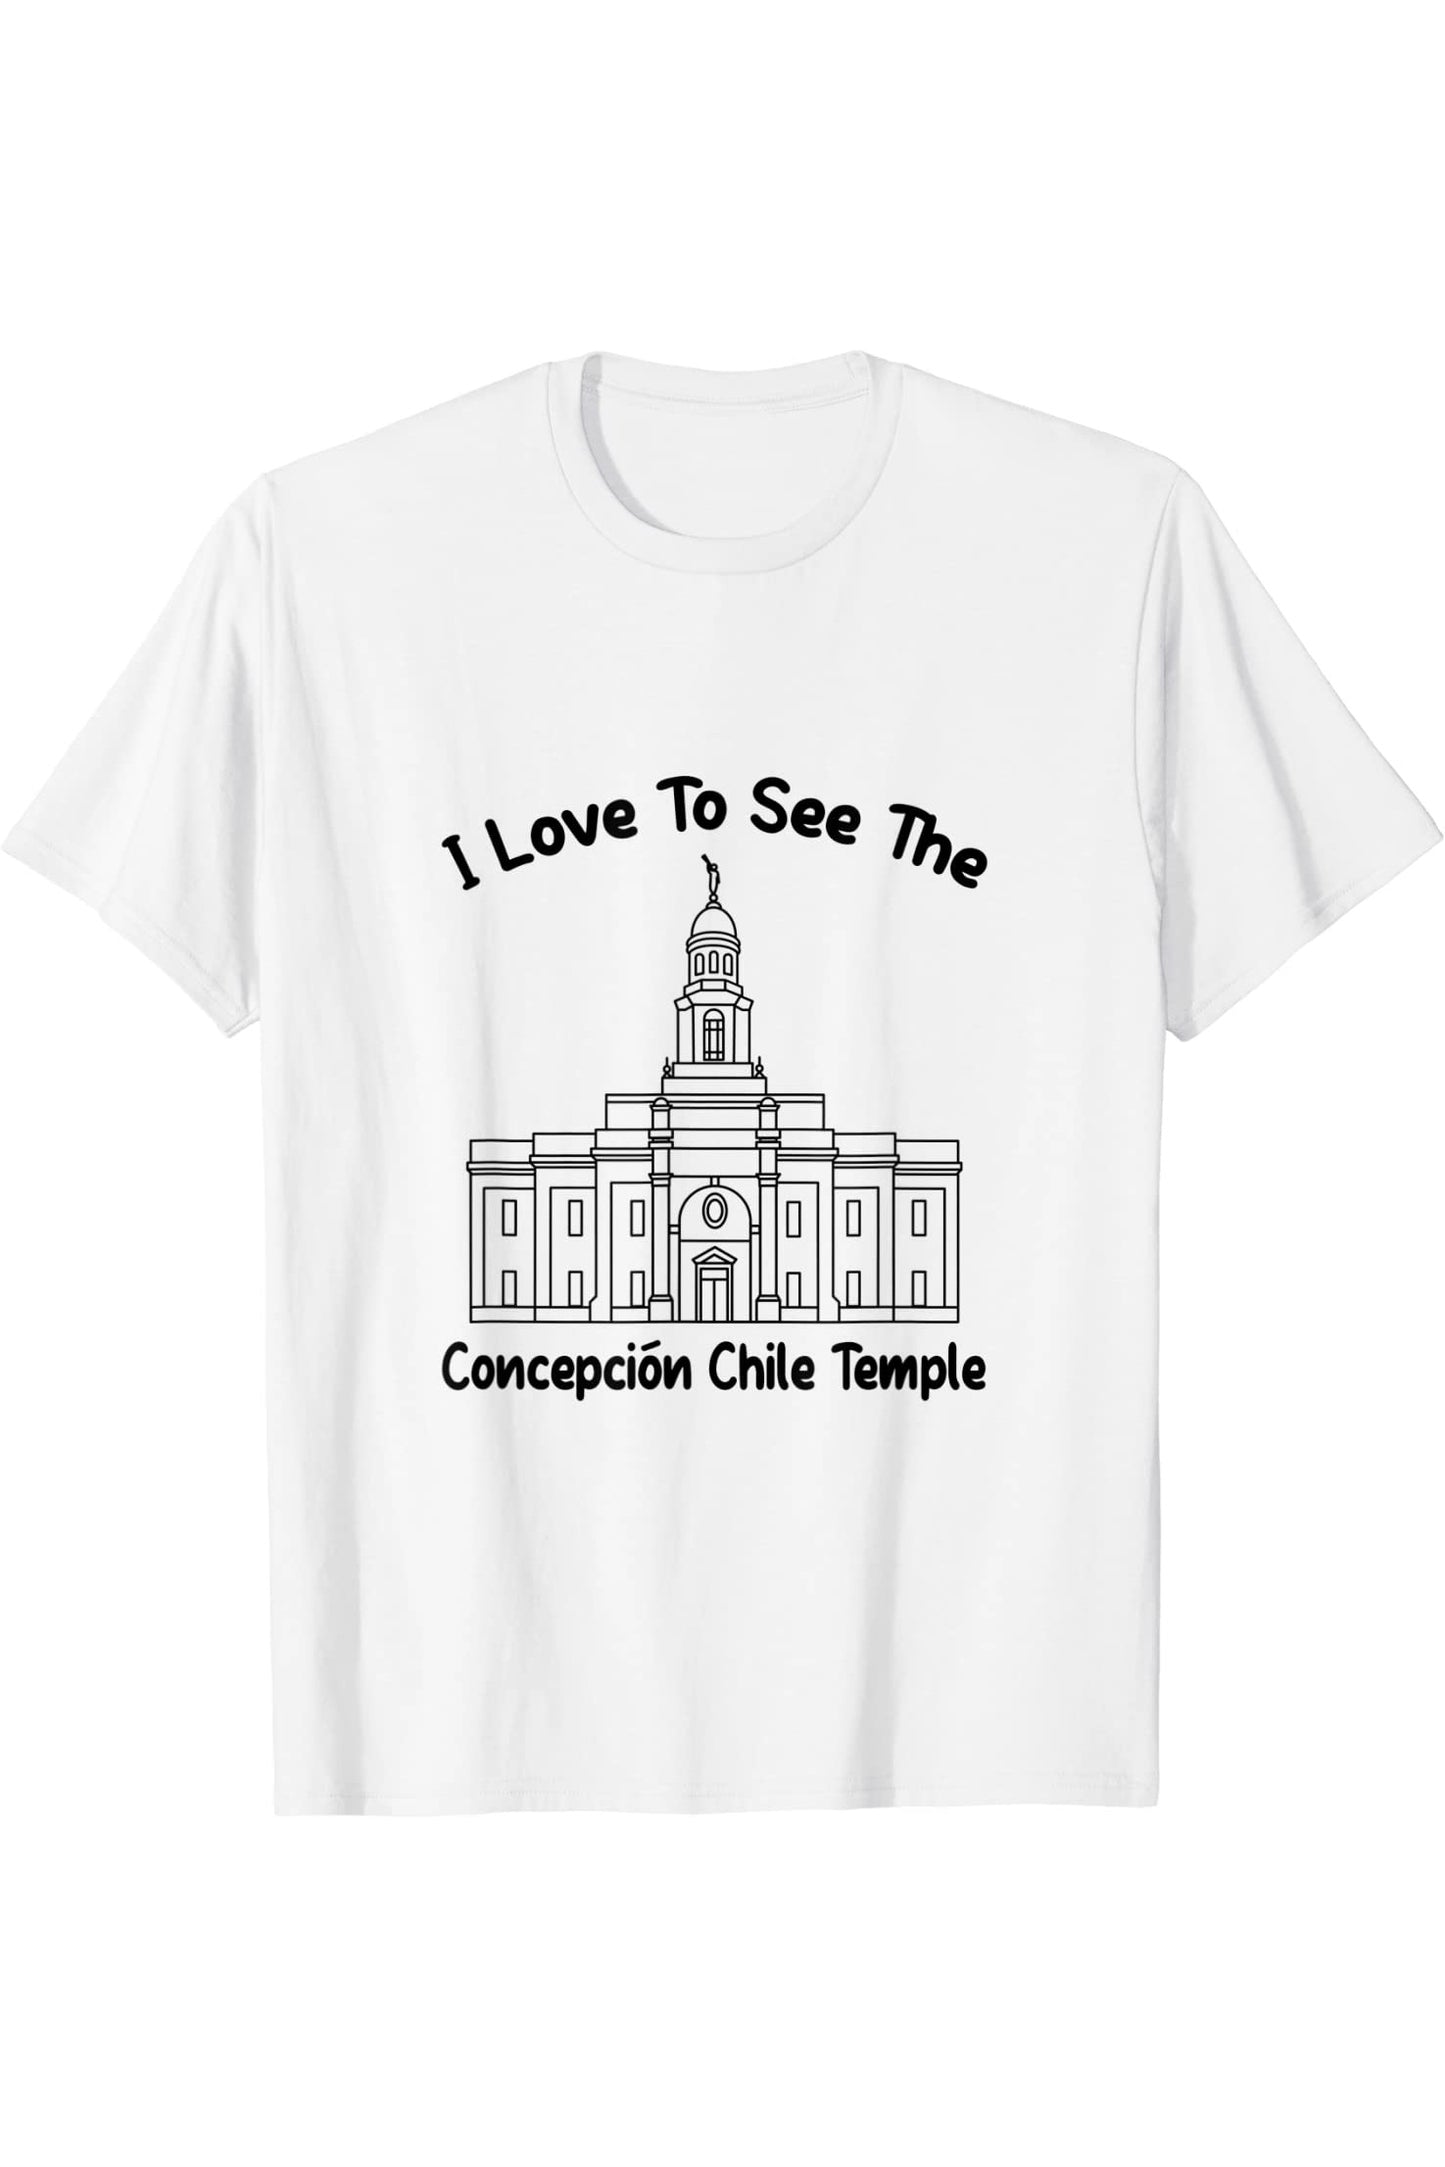 Concepcion Chile Temple T-Shirt - Primary Style (English) US